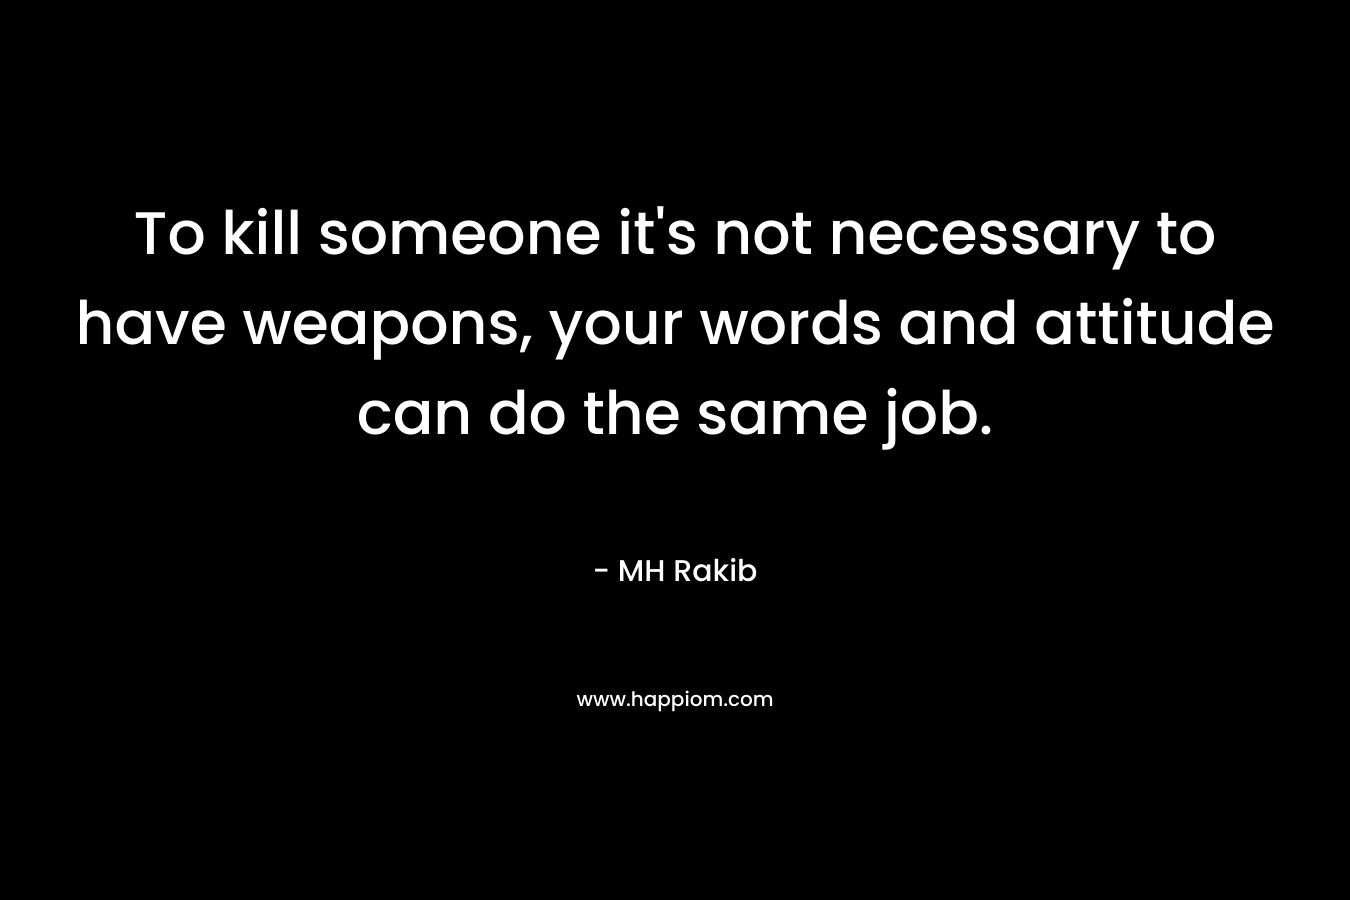 To kill someone it’s not necessary to have weapons, your words and attitude can do the same job. – MH Rakib